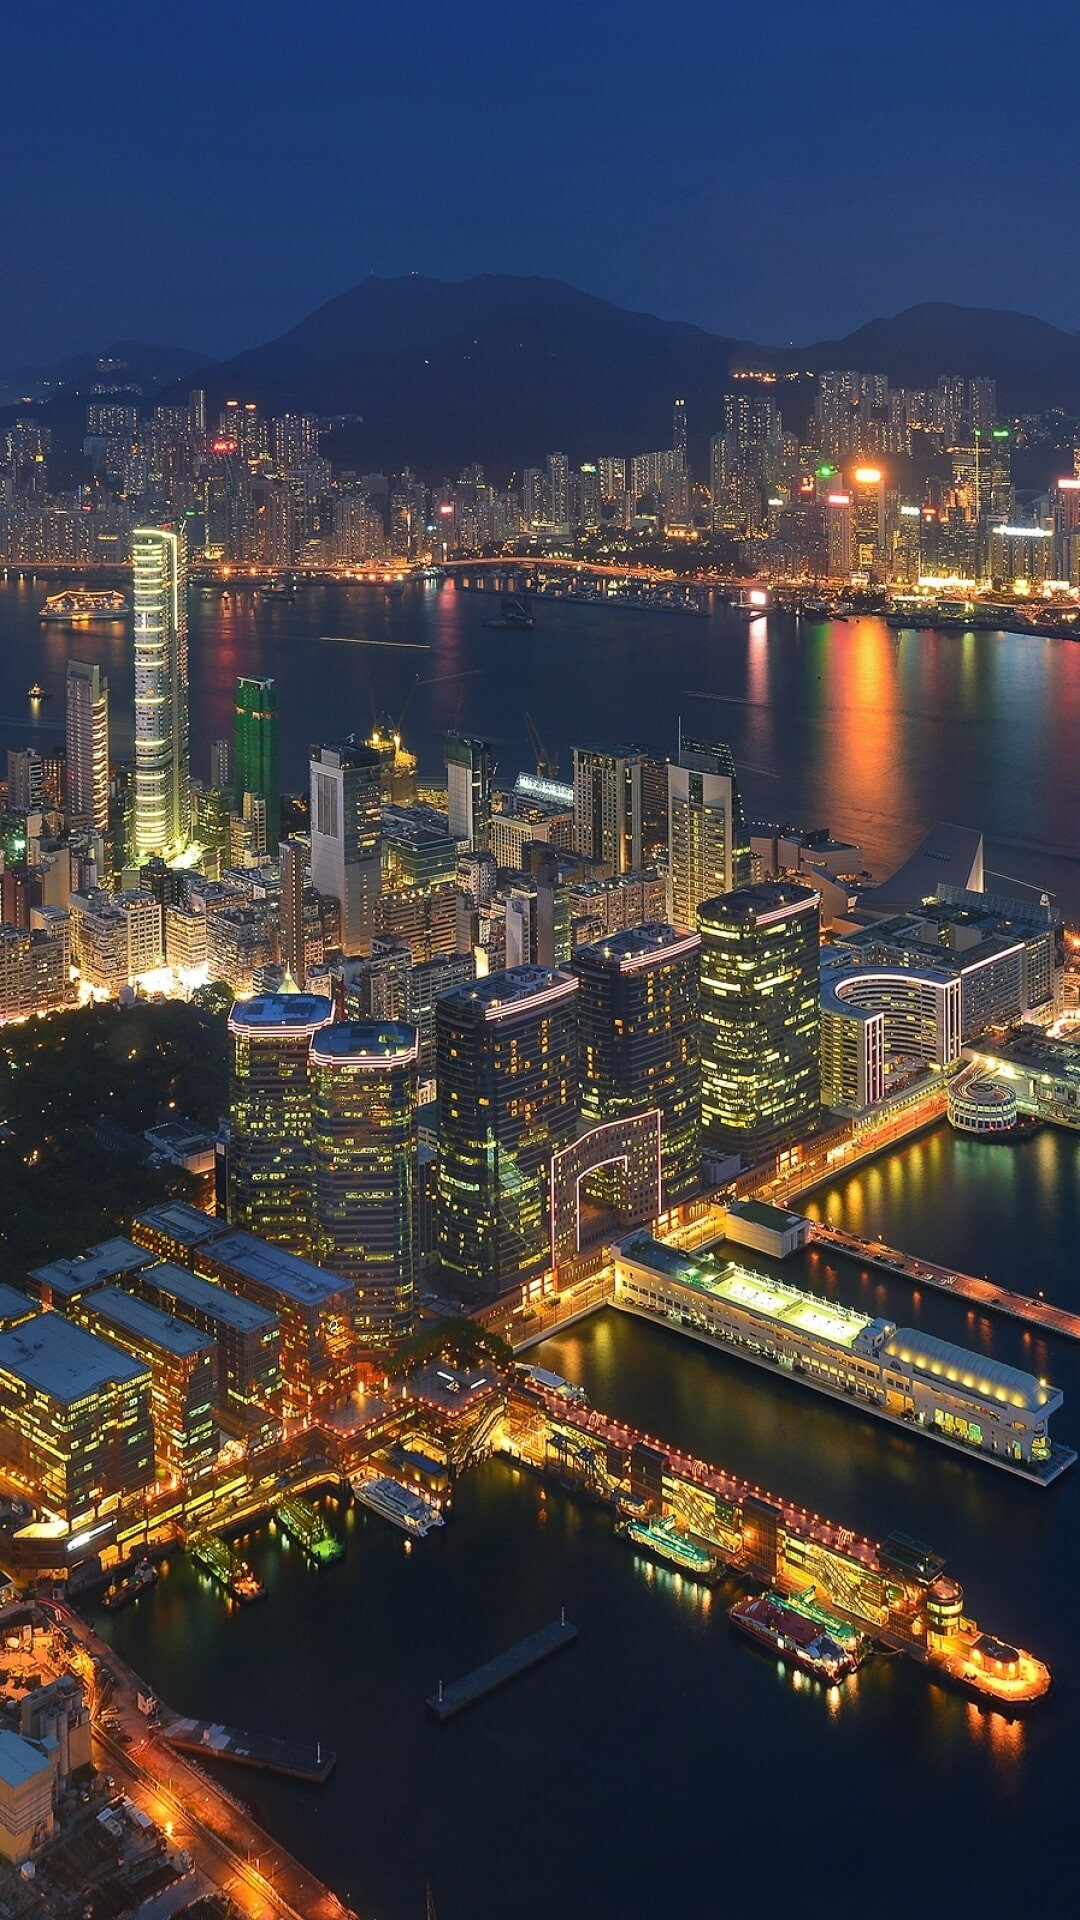 Hong Kong: Tsim Sha Tsui waterfront, Victoria Harbour from Sky100. 1080x1920 Full HD Background.